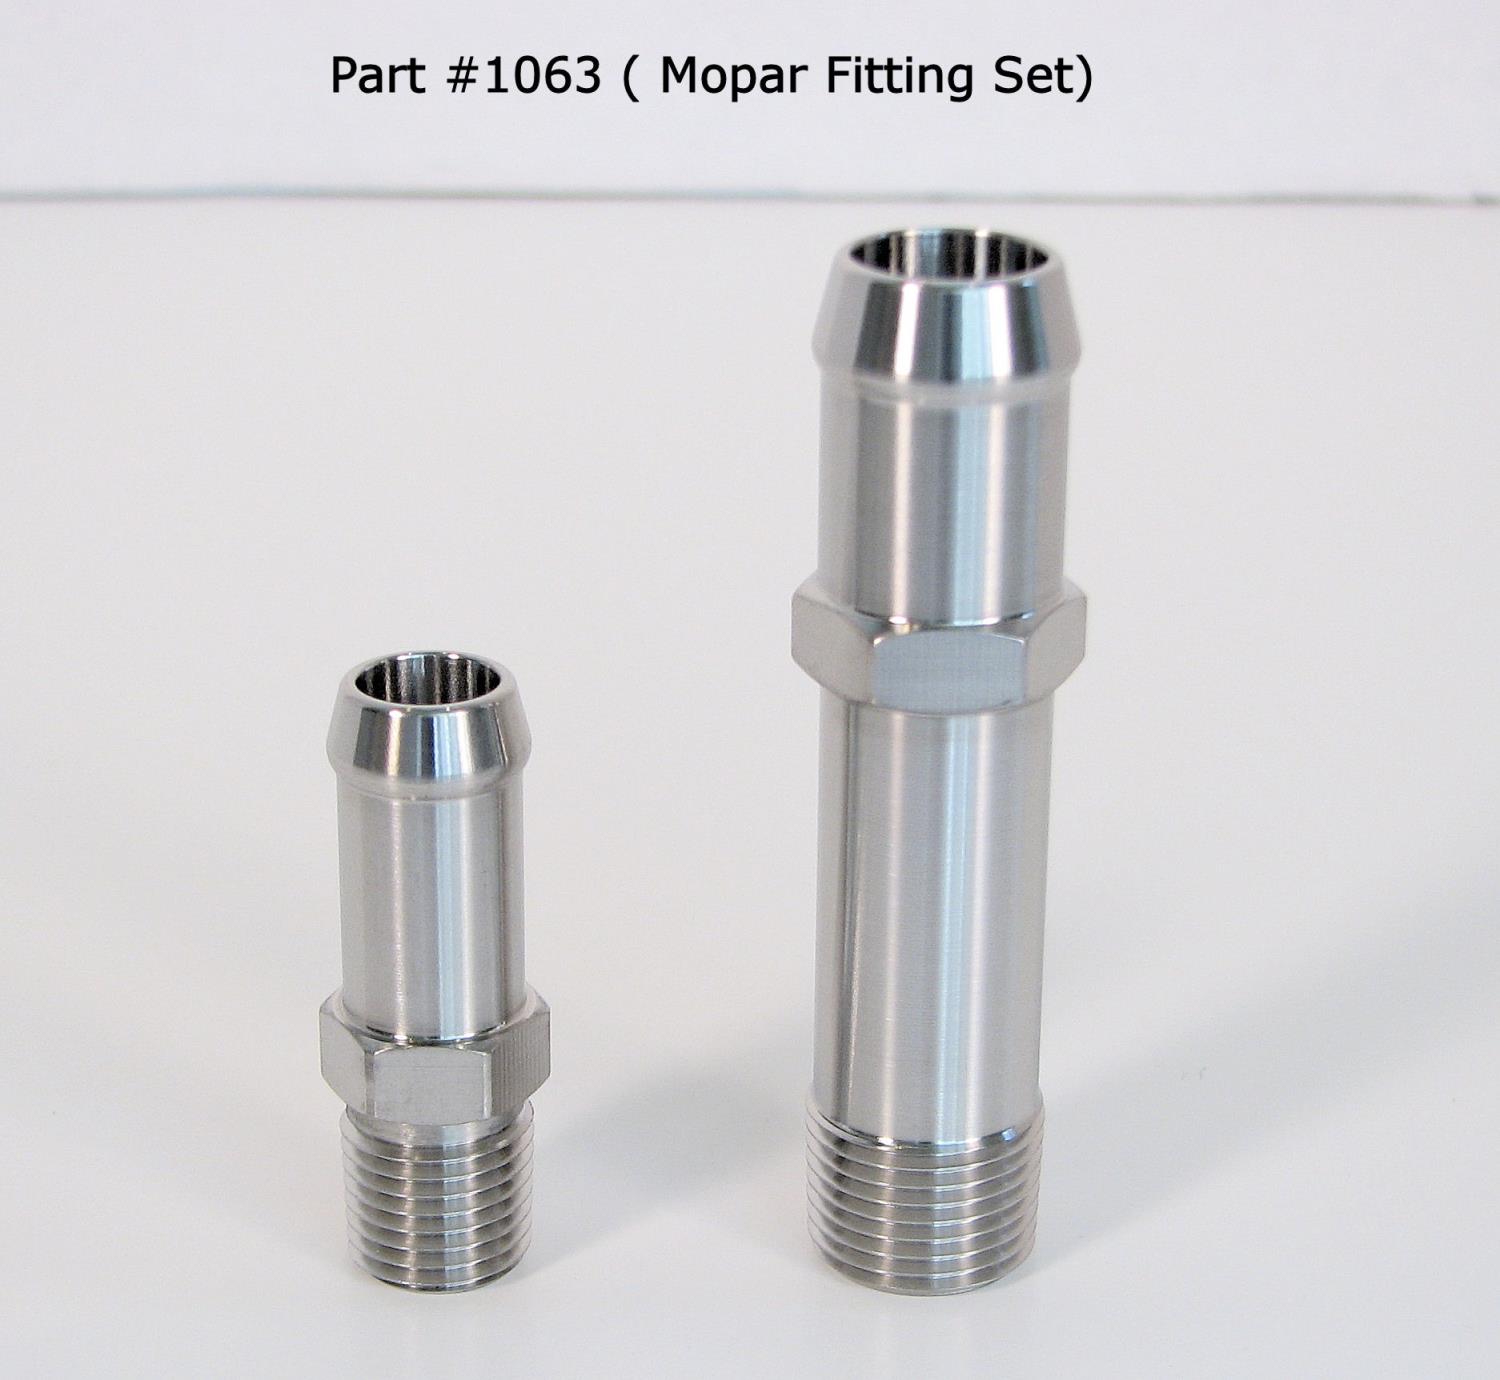 Heater Hose Fitting Set Includes: 3/8 in. NPT x 5/8 in. Hose - 3 in. L, (1) 1/4 in. NPT x 1/2 in. Hose - 1 3/4 in. L [Polished]